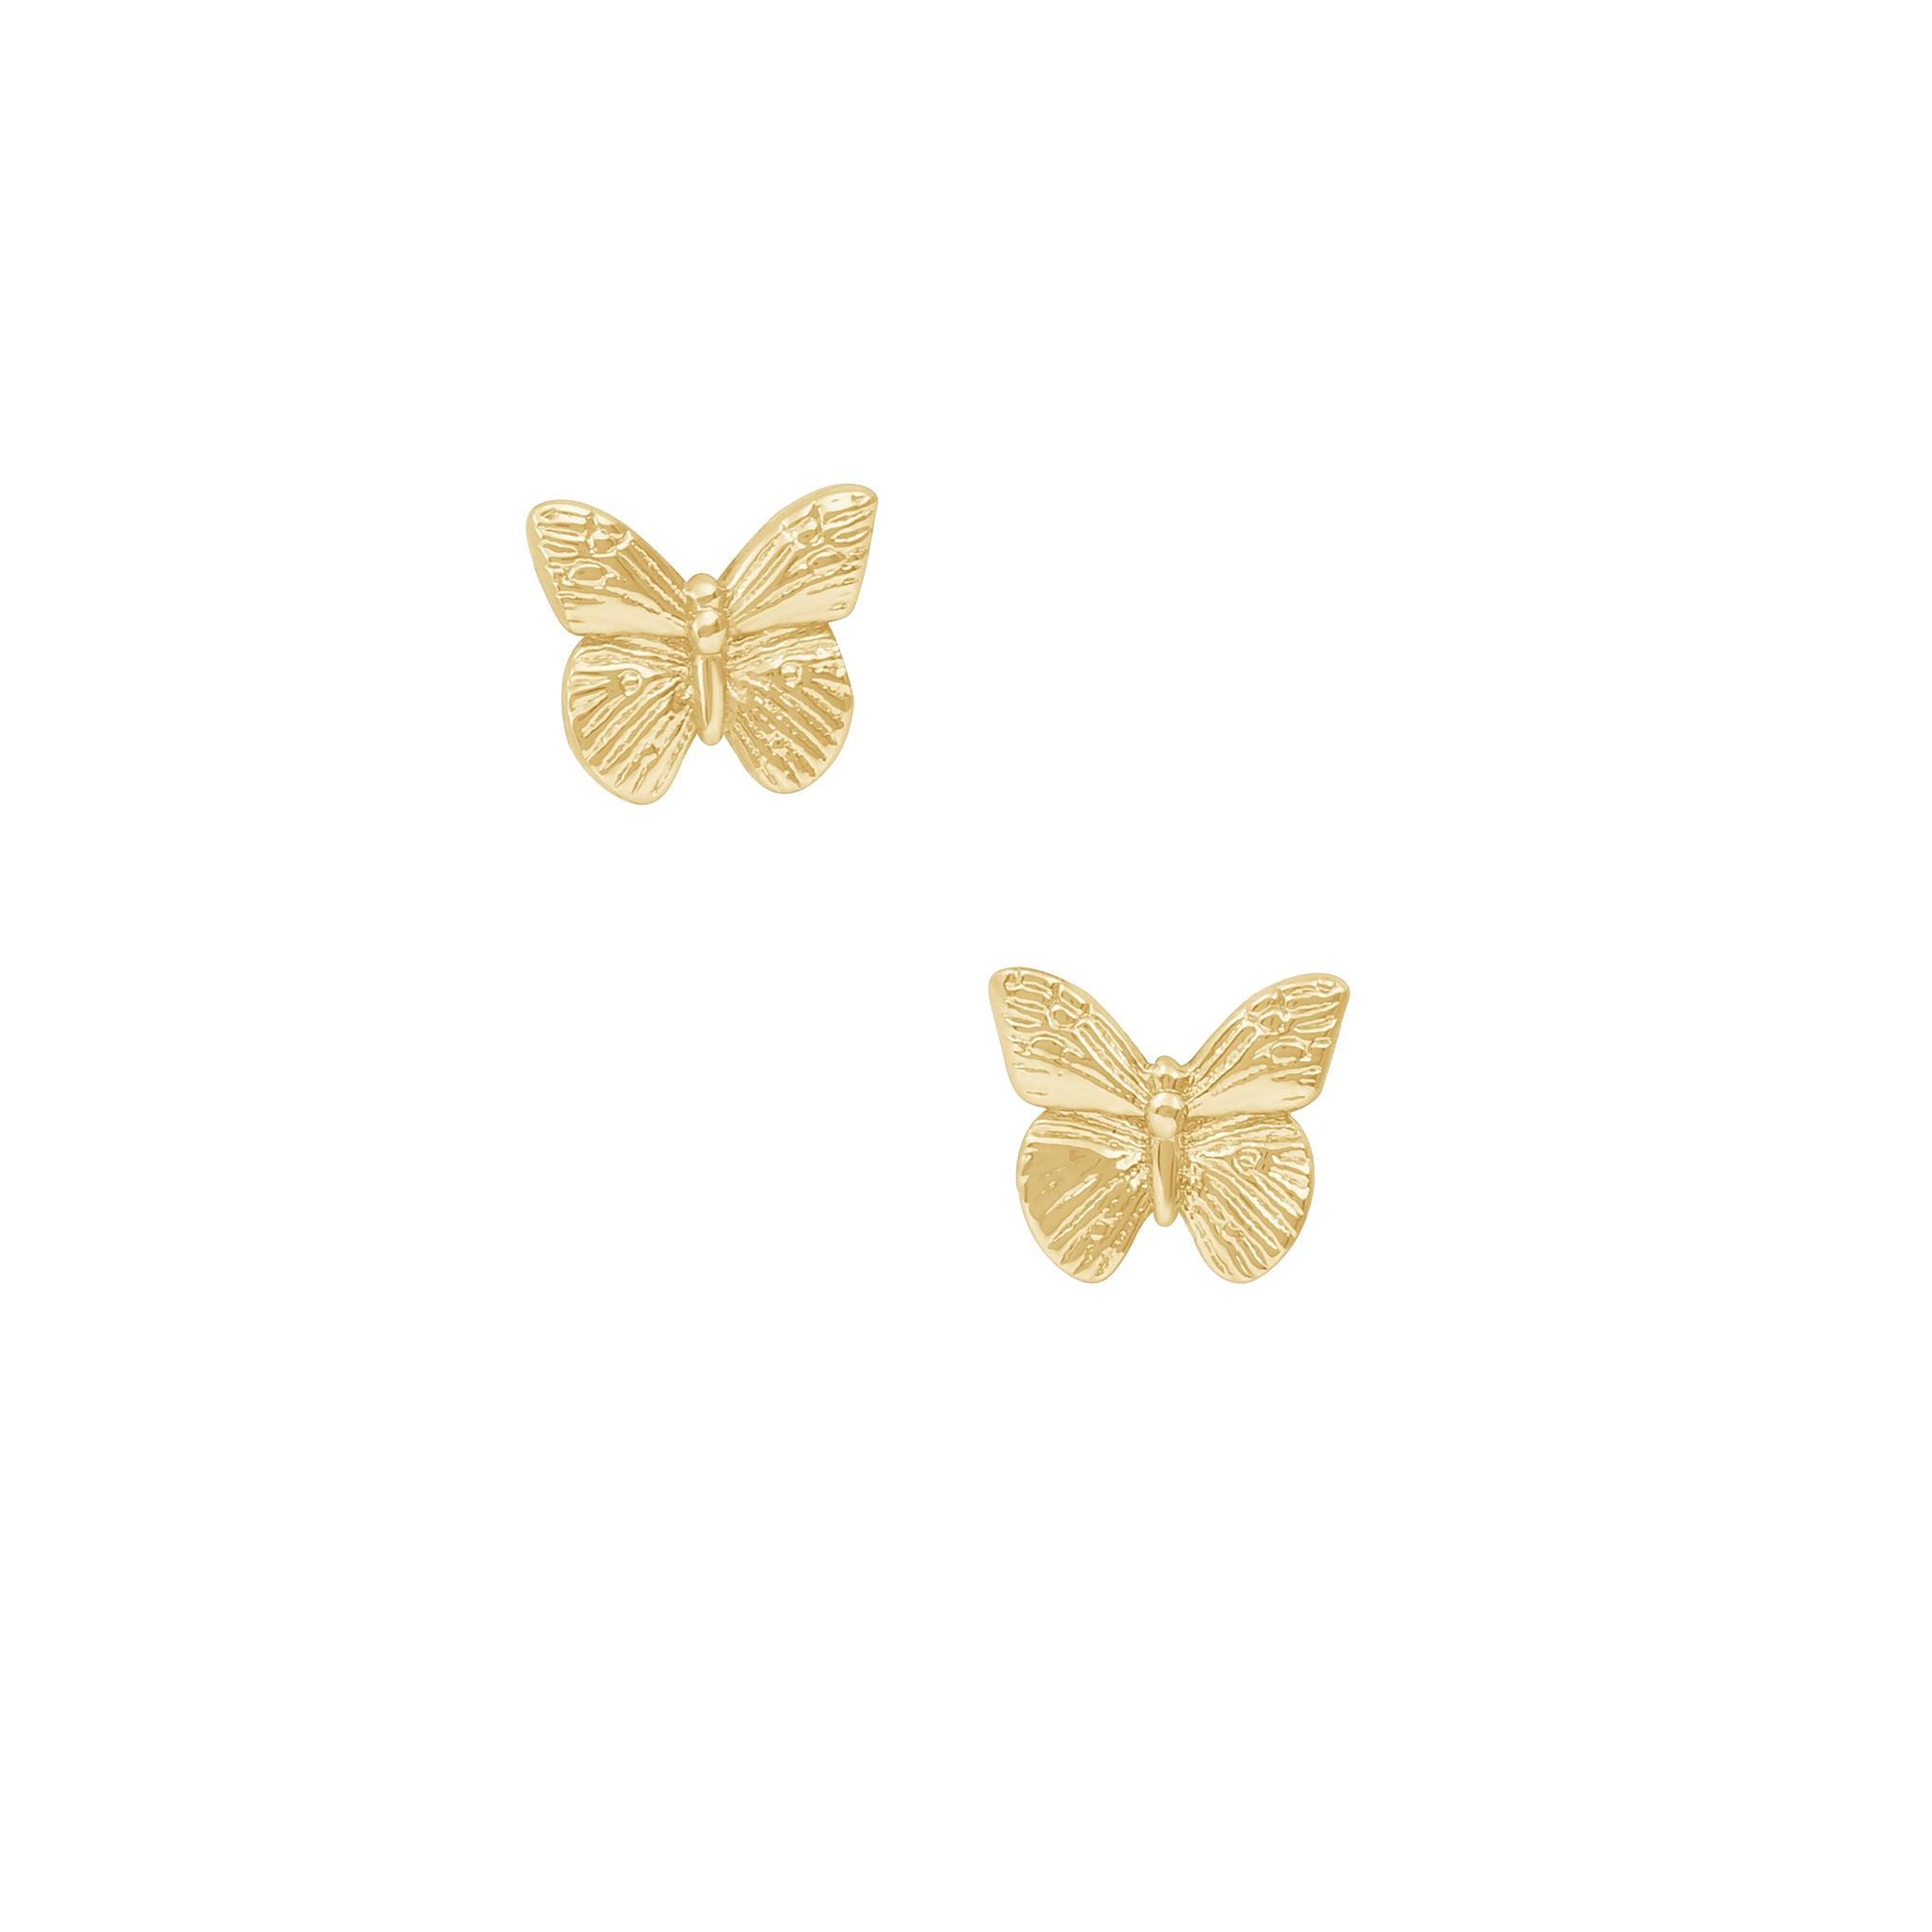 Five and Two Ellis Mini Butterfly Stud Earrings in 14k Gold Plated